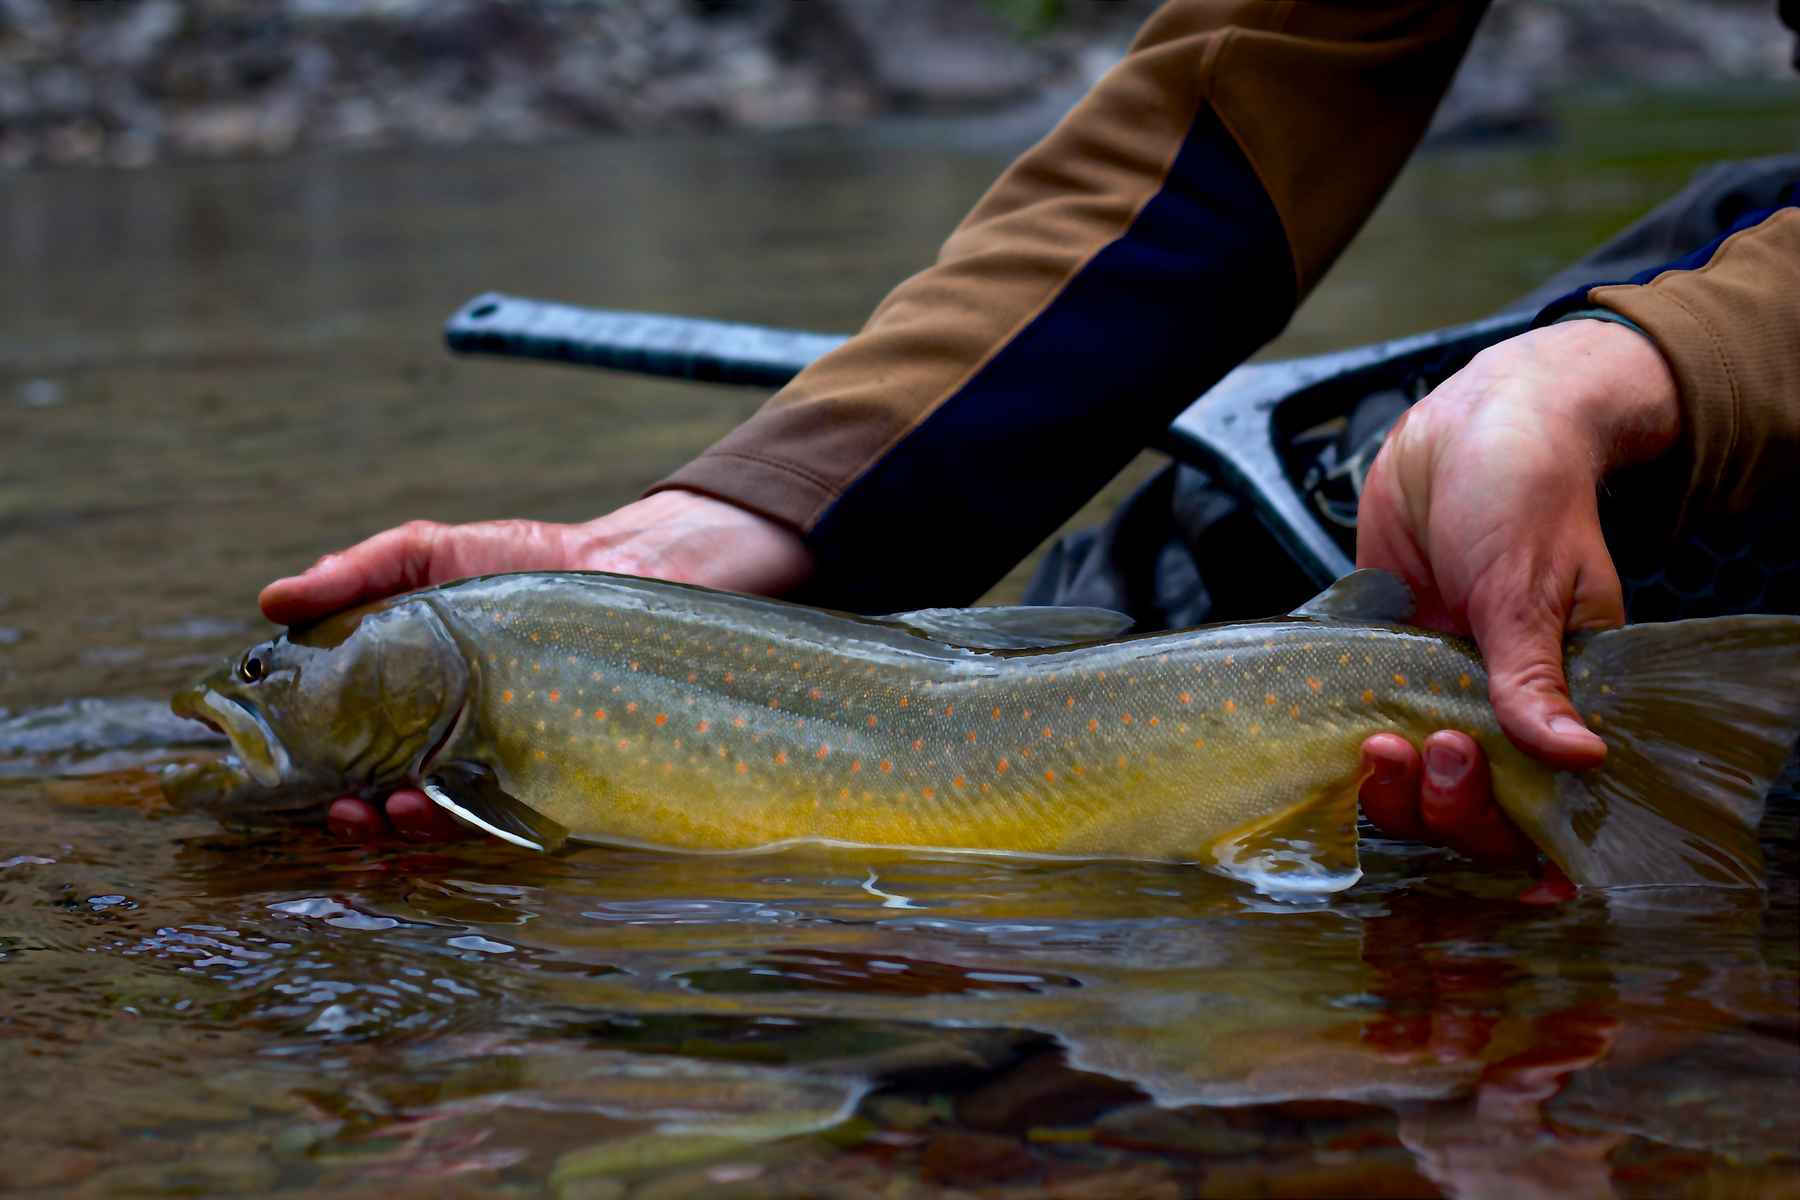 http://www.hatchmag.com/sites/default/files/styles/extra-large/public/field/image/Bull-trout.jpg